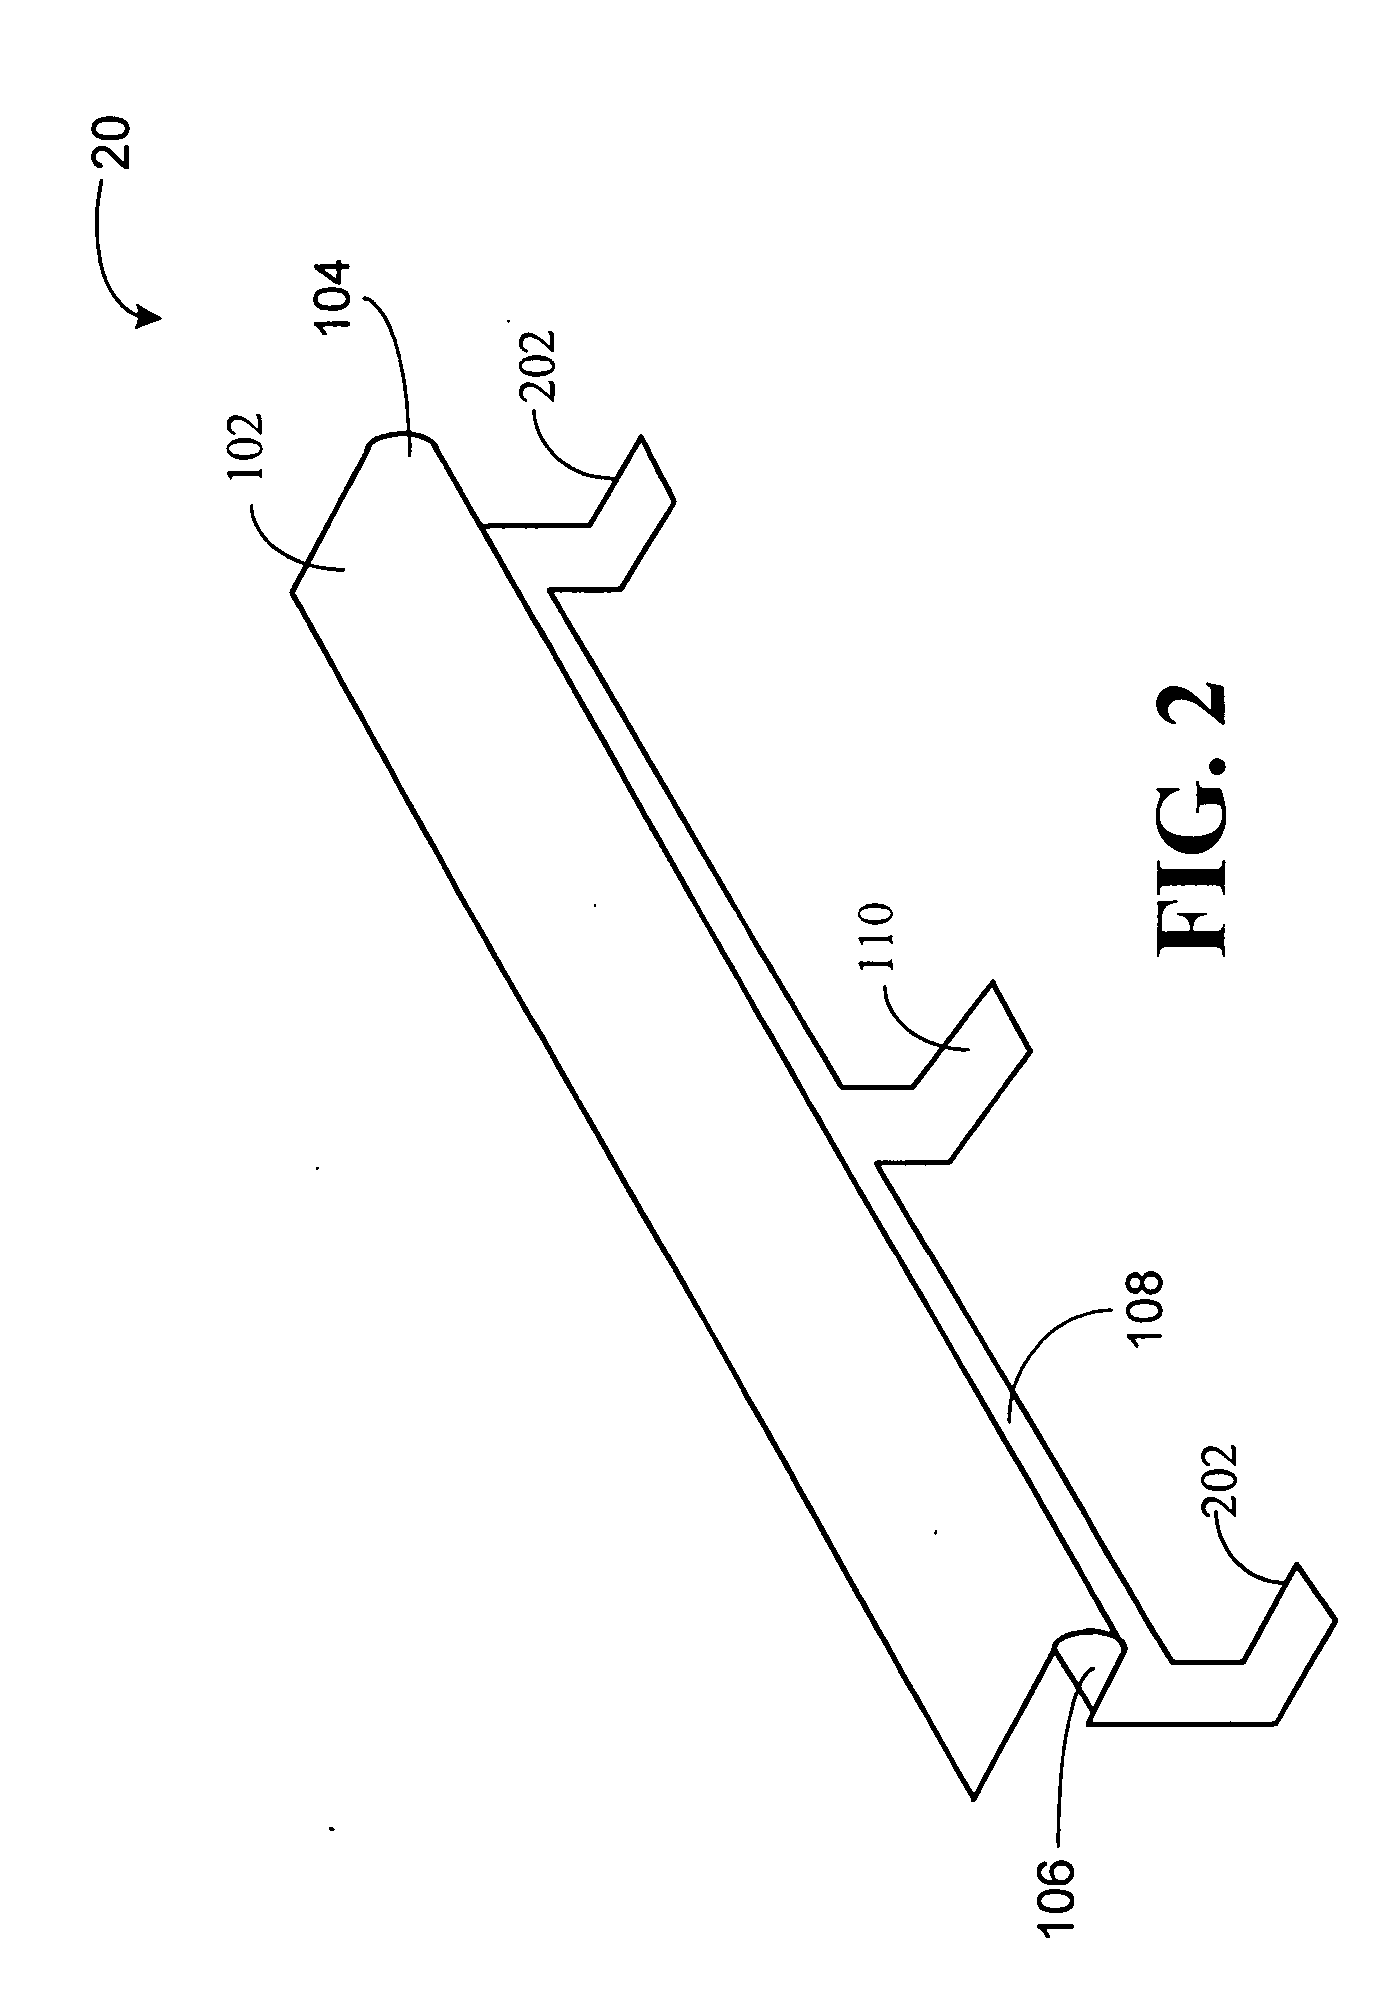 Apparatus for stiffening a circuit board